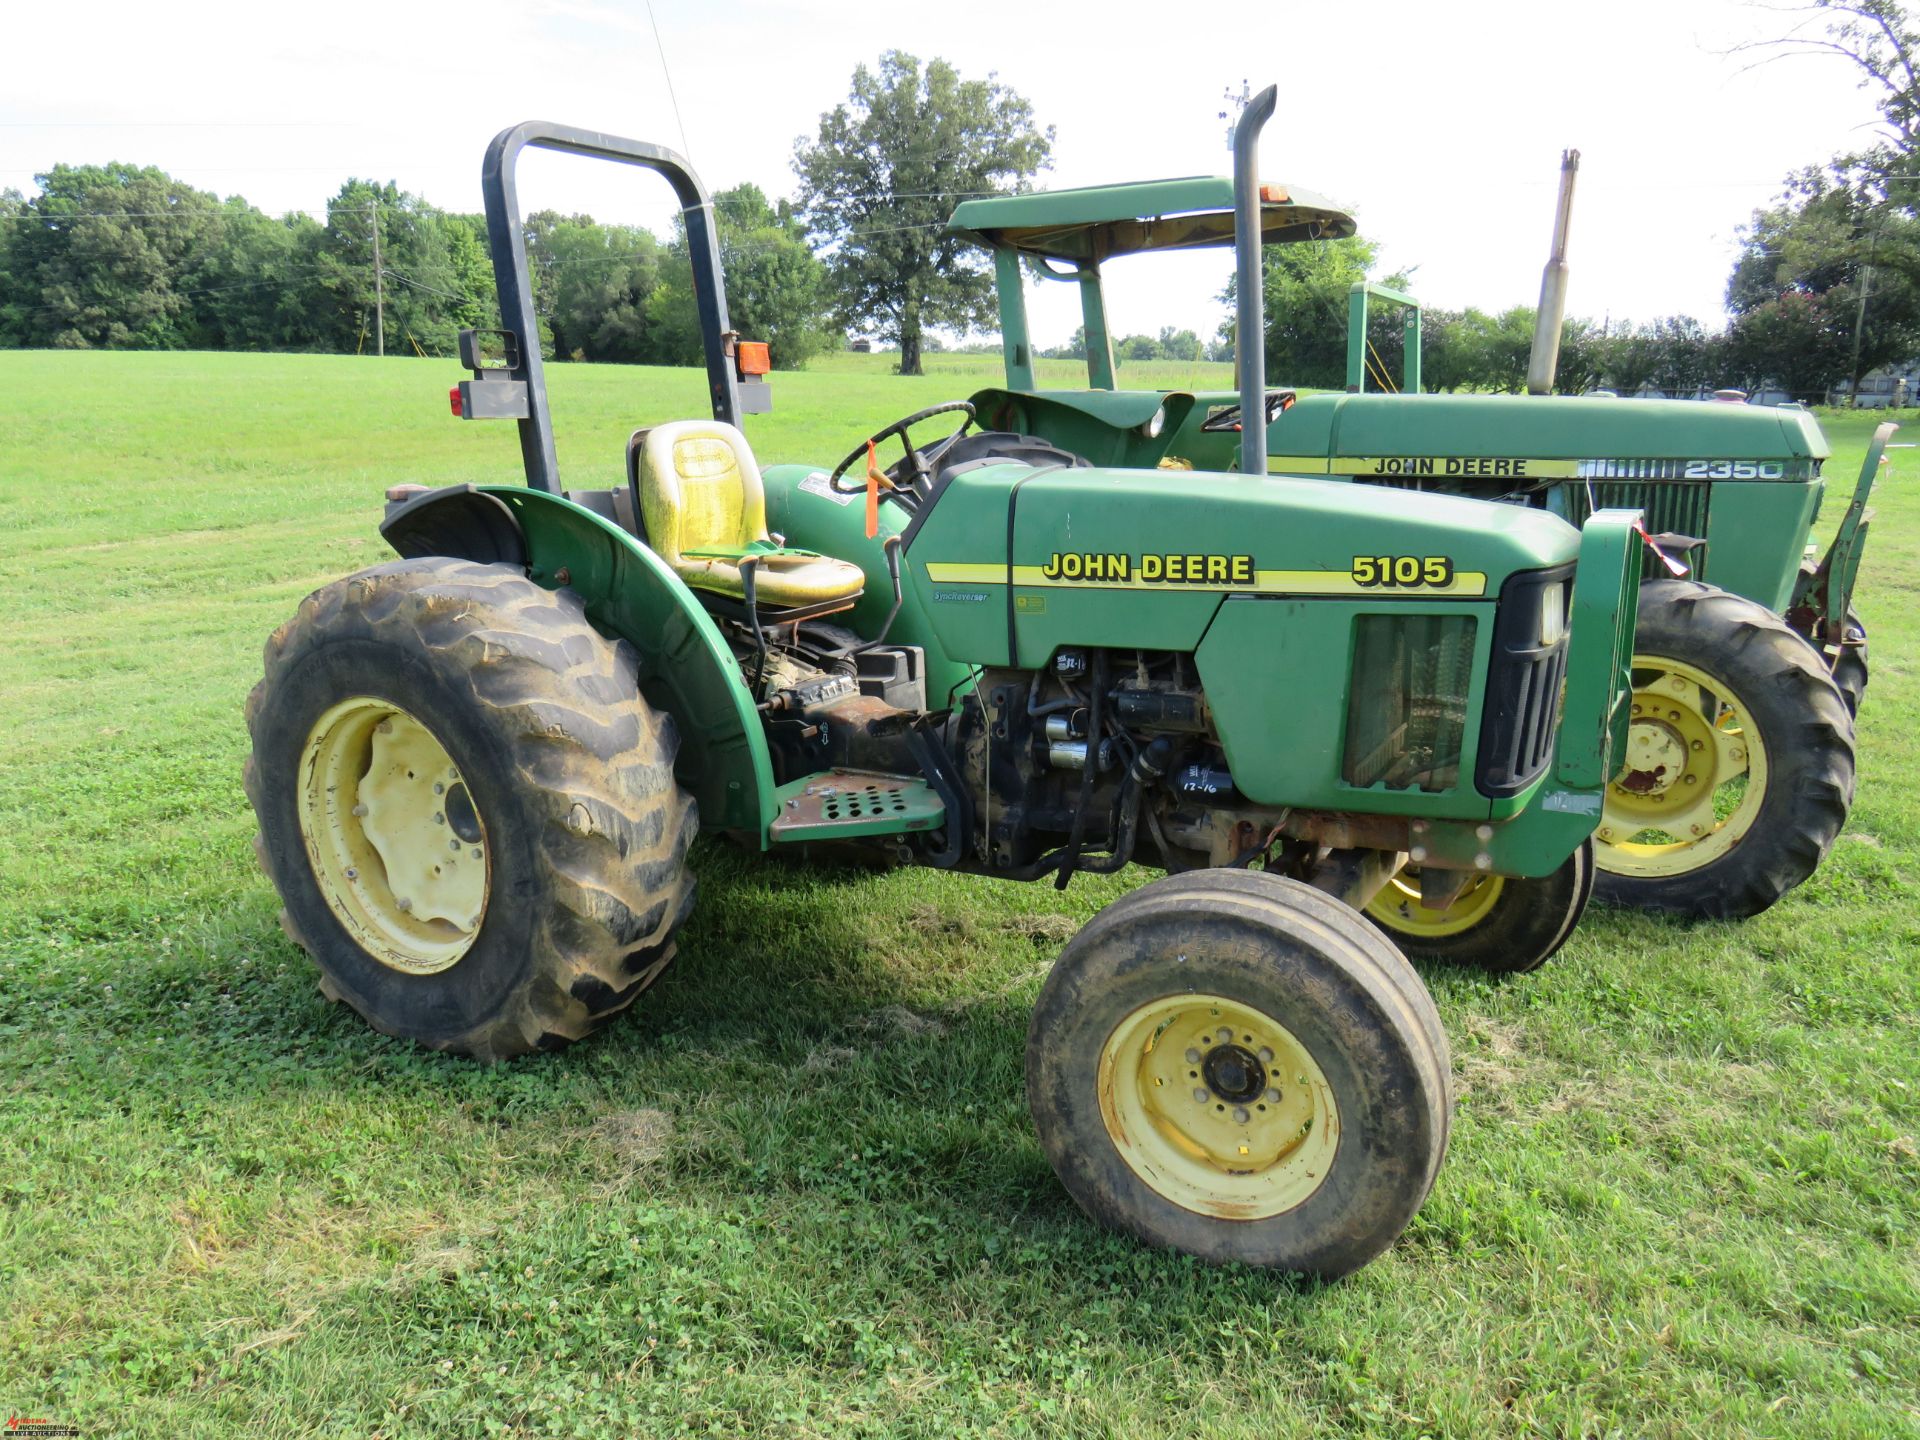 2004 JOHN DEERE 5105 TRACTOR, 3PT, NO TOP LINK, HAS PTO, 16.9-24 TIRES, NON-RUNNING UNIT, FOR - Image 2 of 7